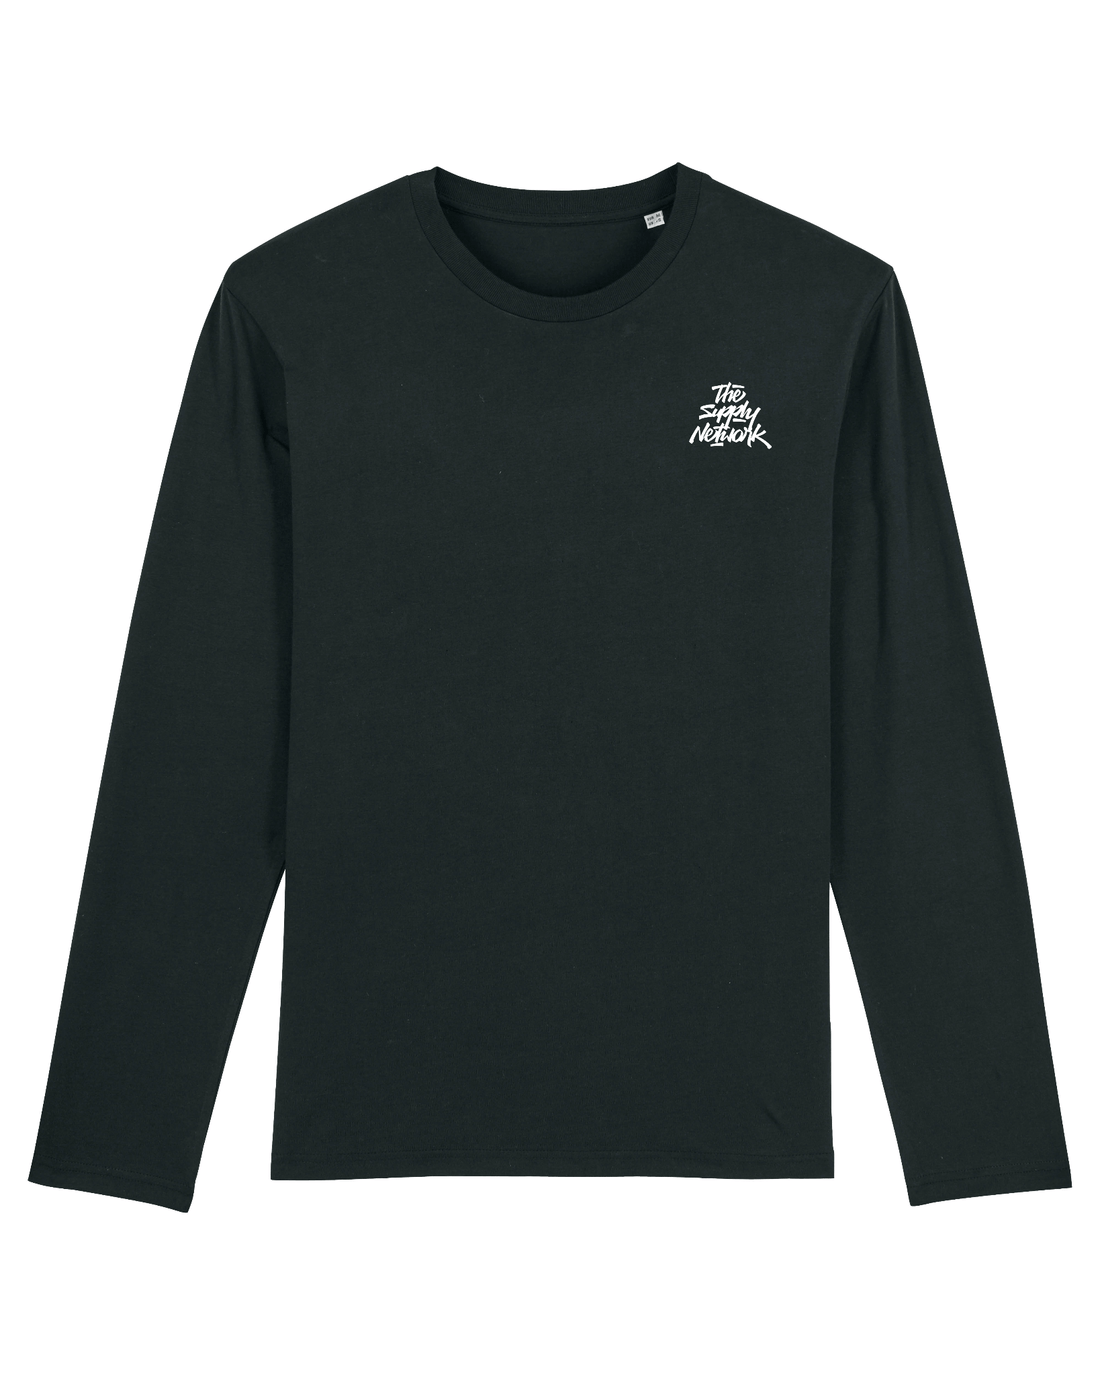 Black Skater Long Sleeve, The Supply Network Front Print